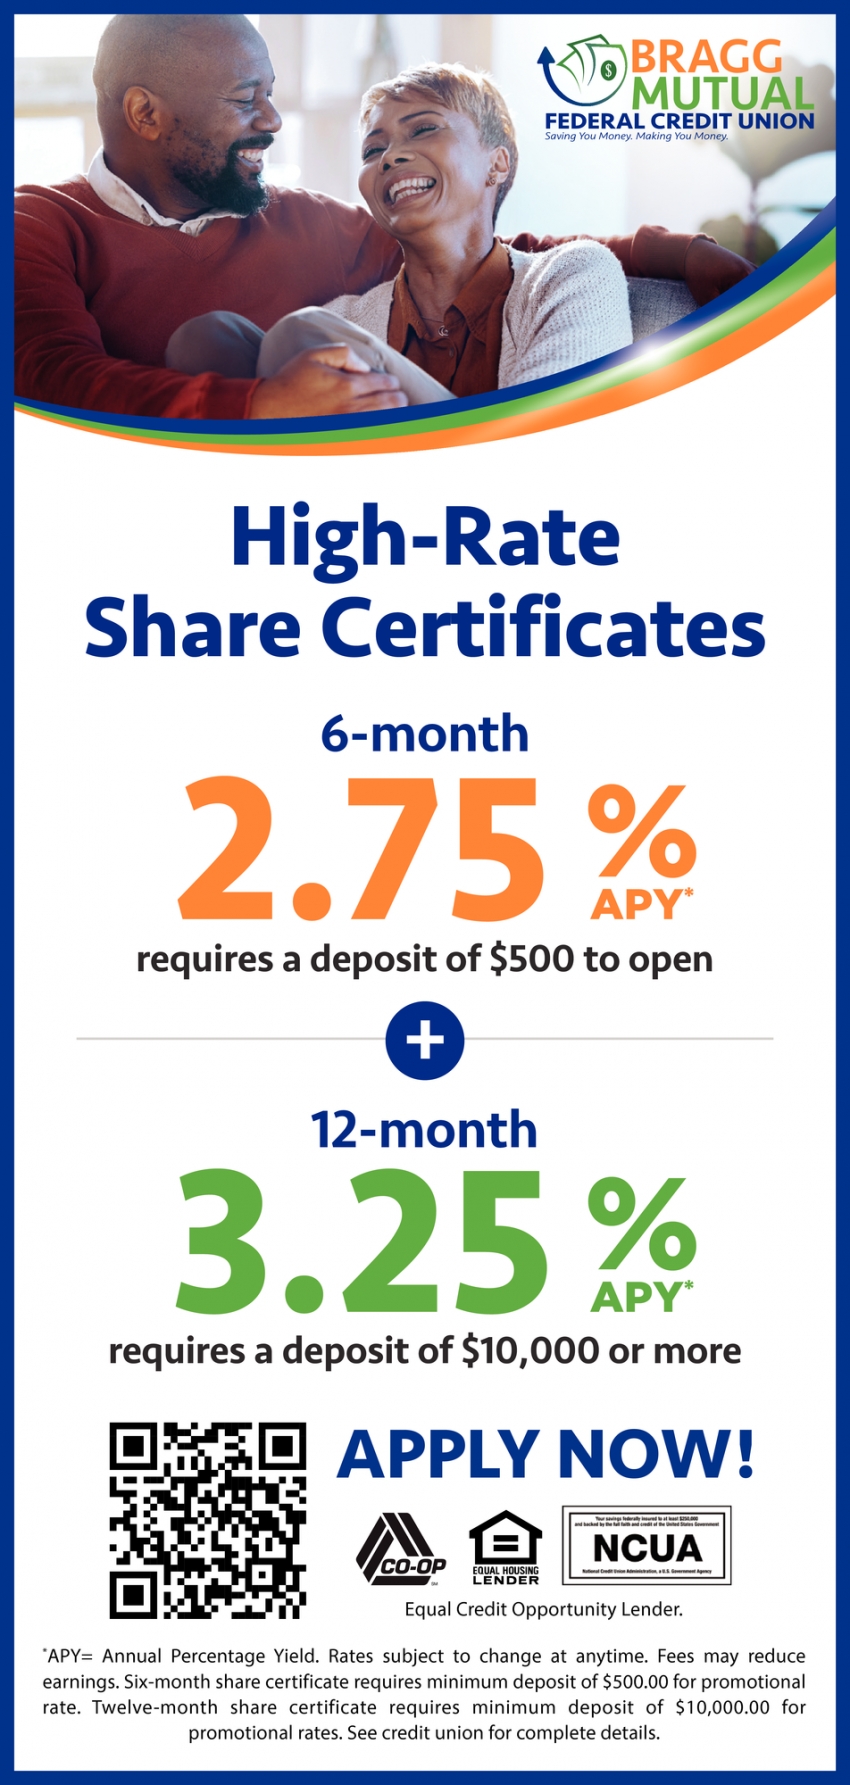 High-Rate Share Certificates